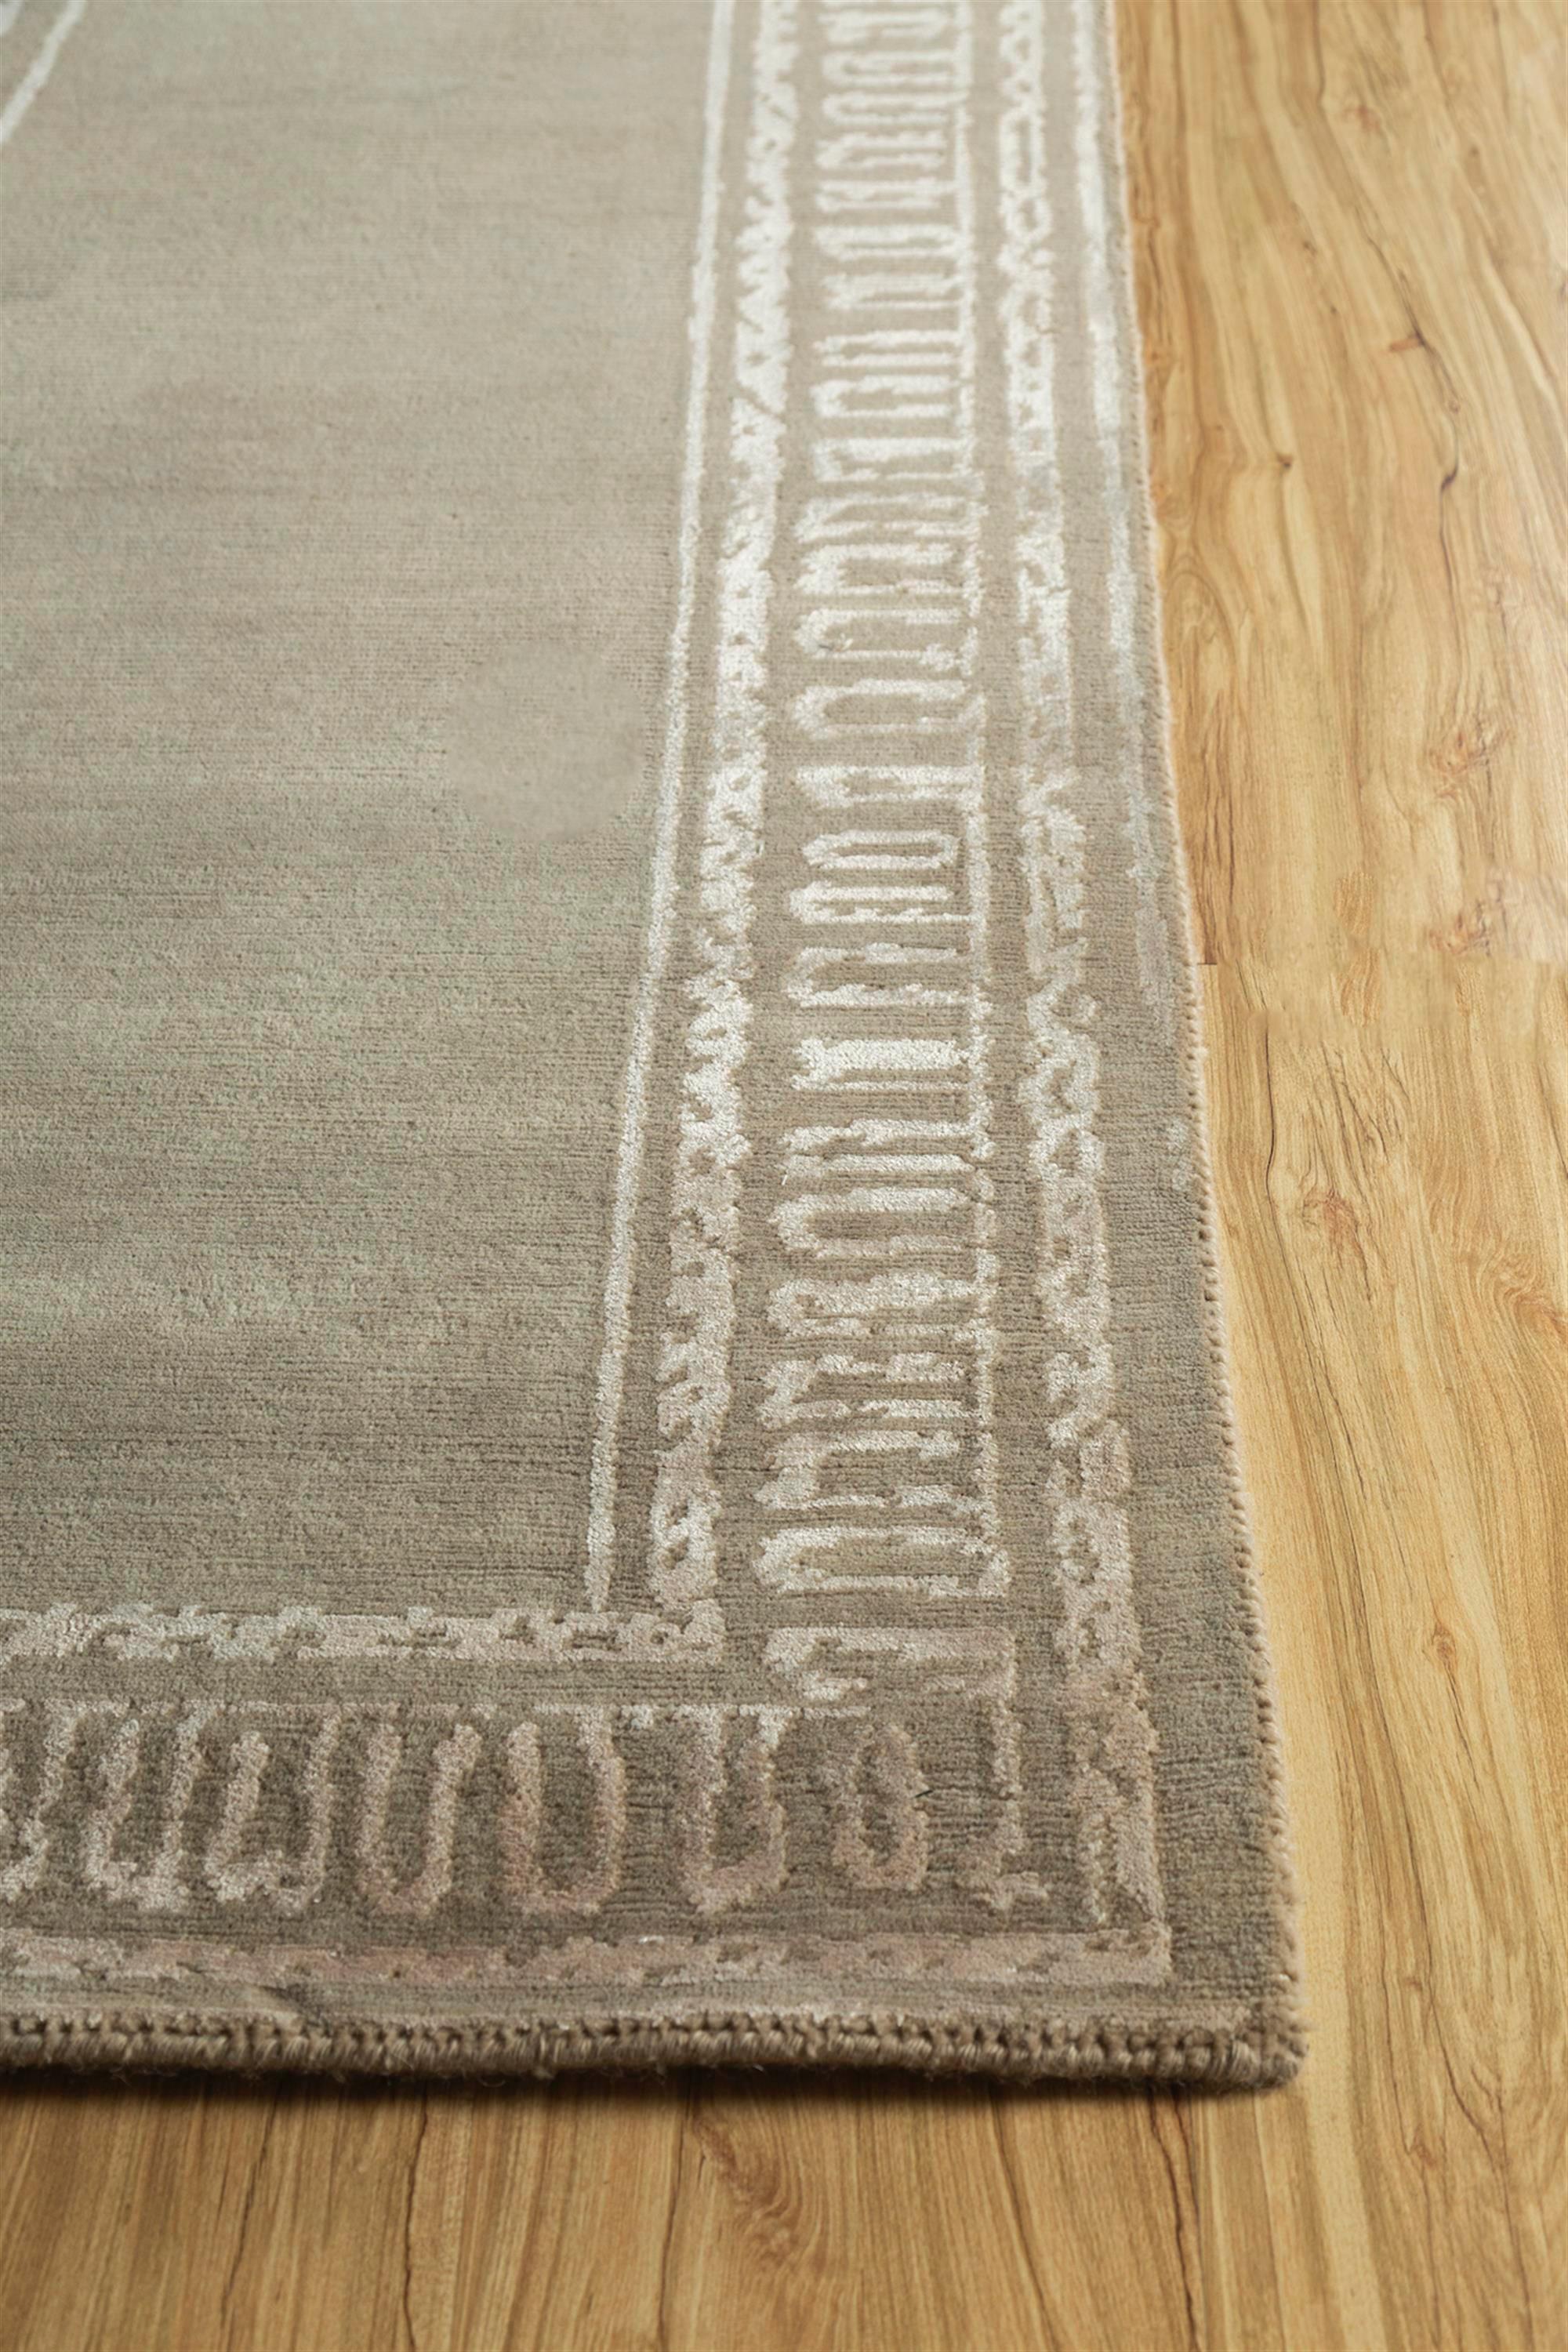 Can a rug transform a room? Discover the answer with this modern, hand-knotted masterpiece . Immerse your space in its soothing tone-on-tone palette, instantly uplifting the mood. With a ground color of Mink and a border in Medium Tan, this rug